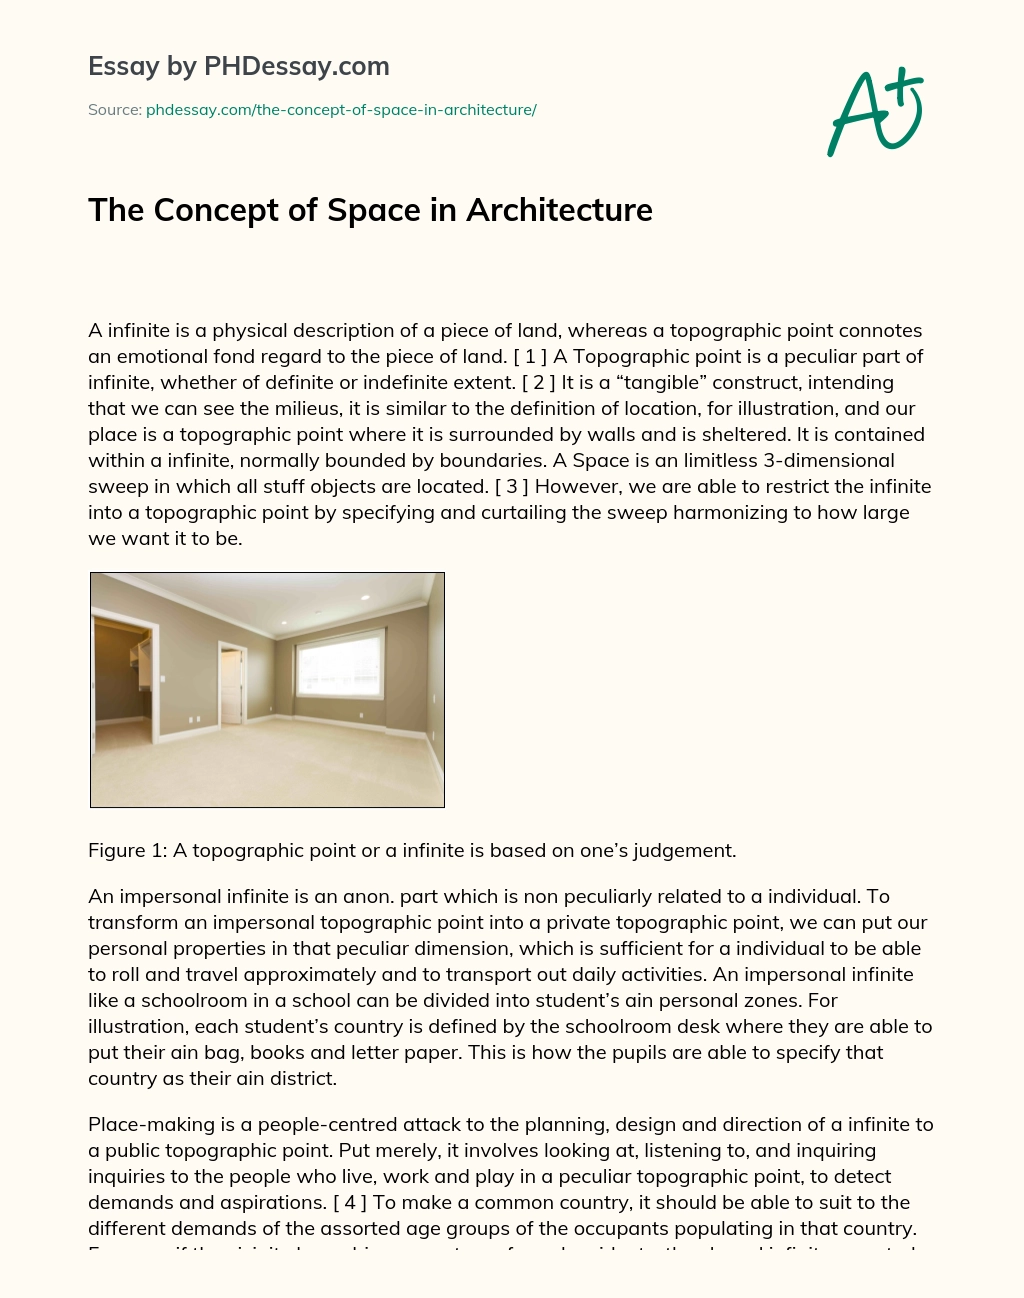 The Concept of Space in Architecture essay